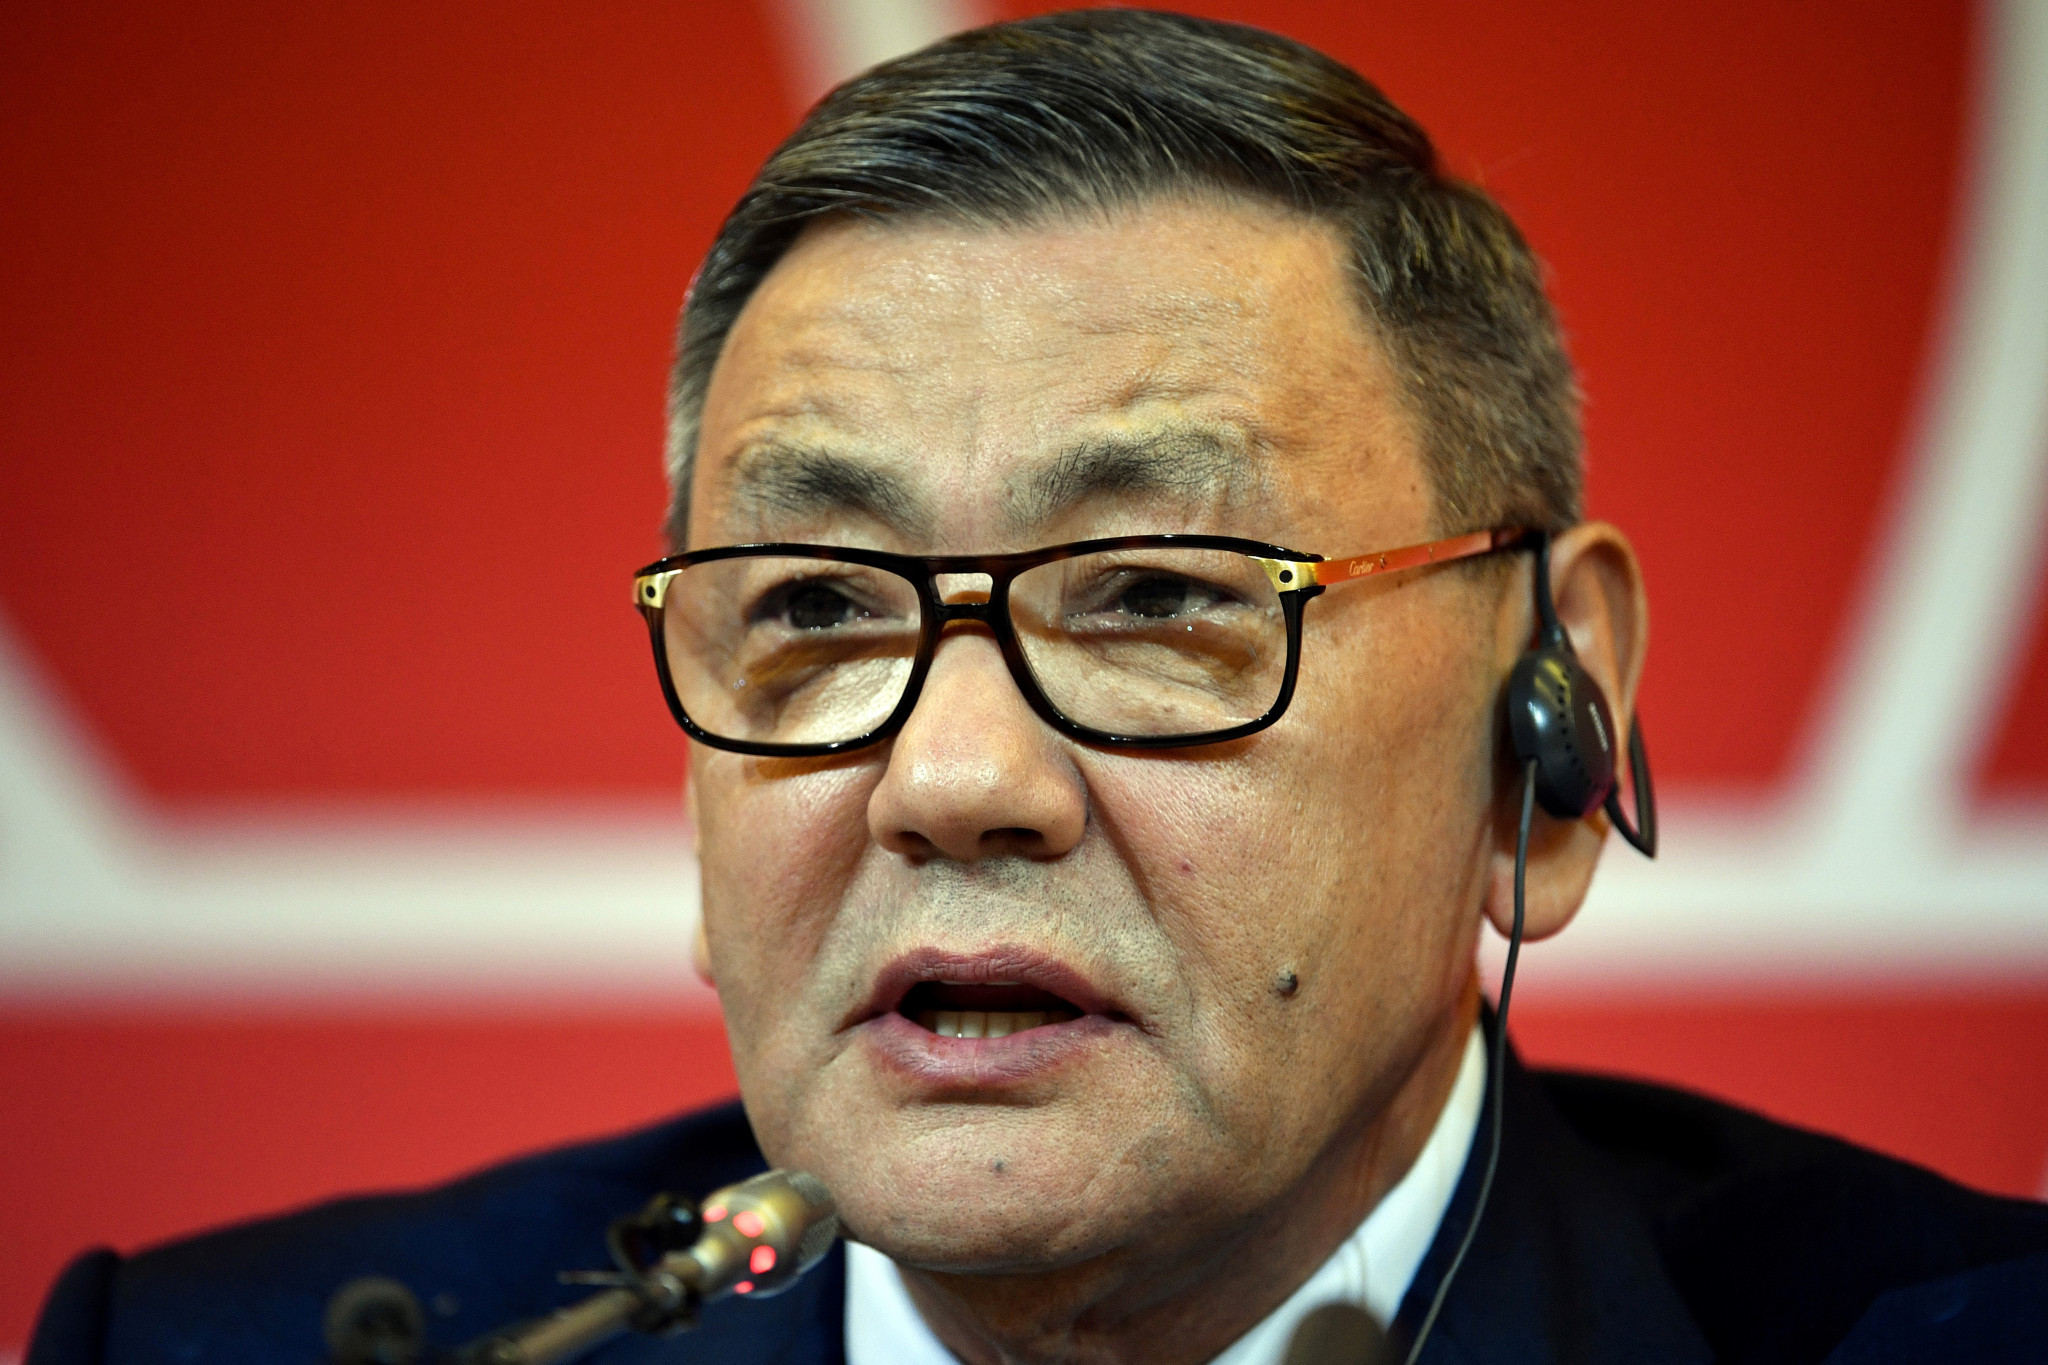 Gafur Rakhimov was the former President of AIBA before standing down due to heroin trafficking allegations ©Getty Images